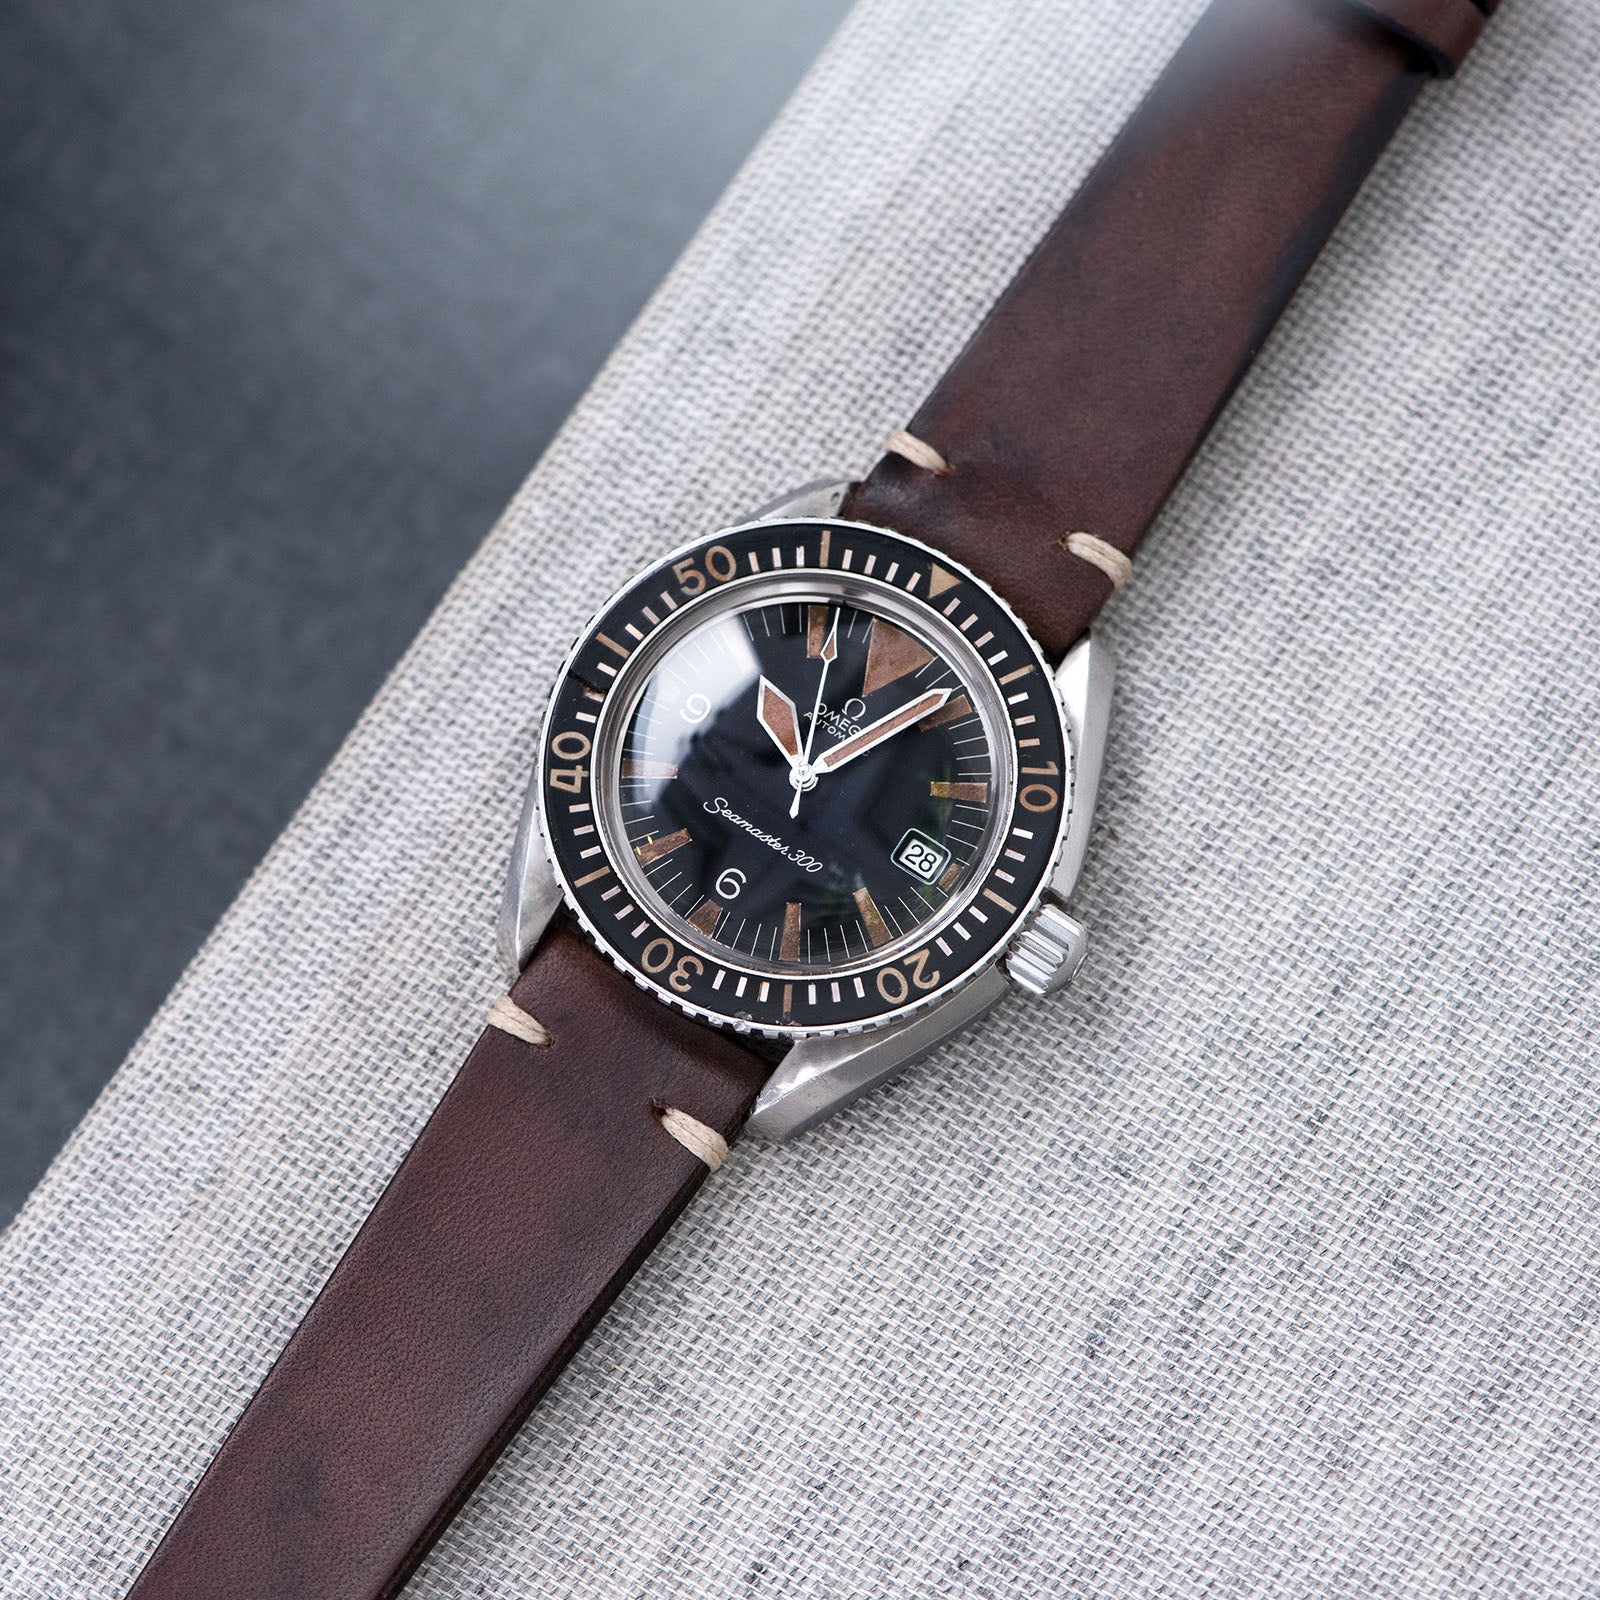 Bulang and Sons_Strap Guide_The omega SM 300 Seamaster_Lumberjack Brown Leather Watch Strap